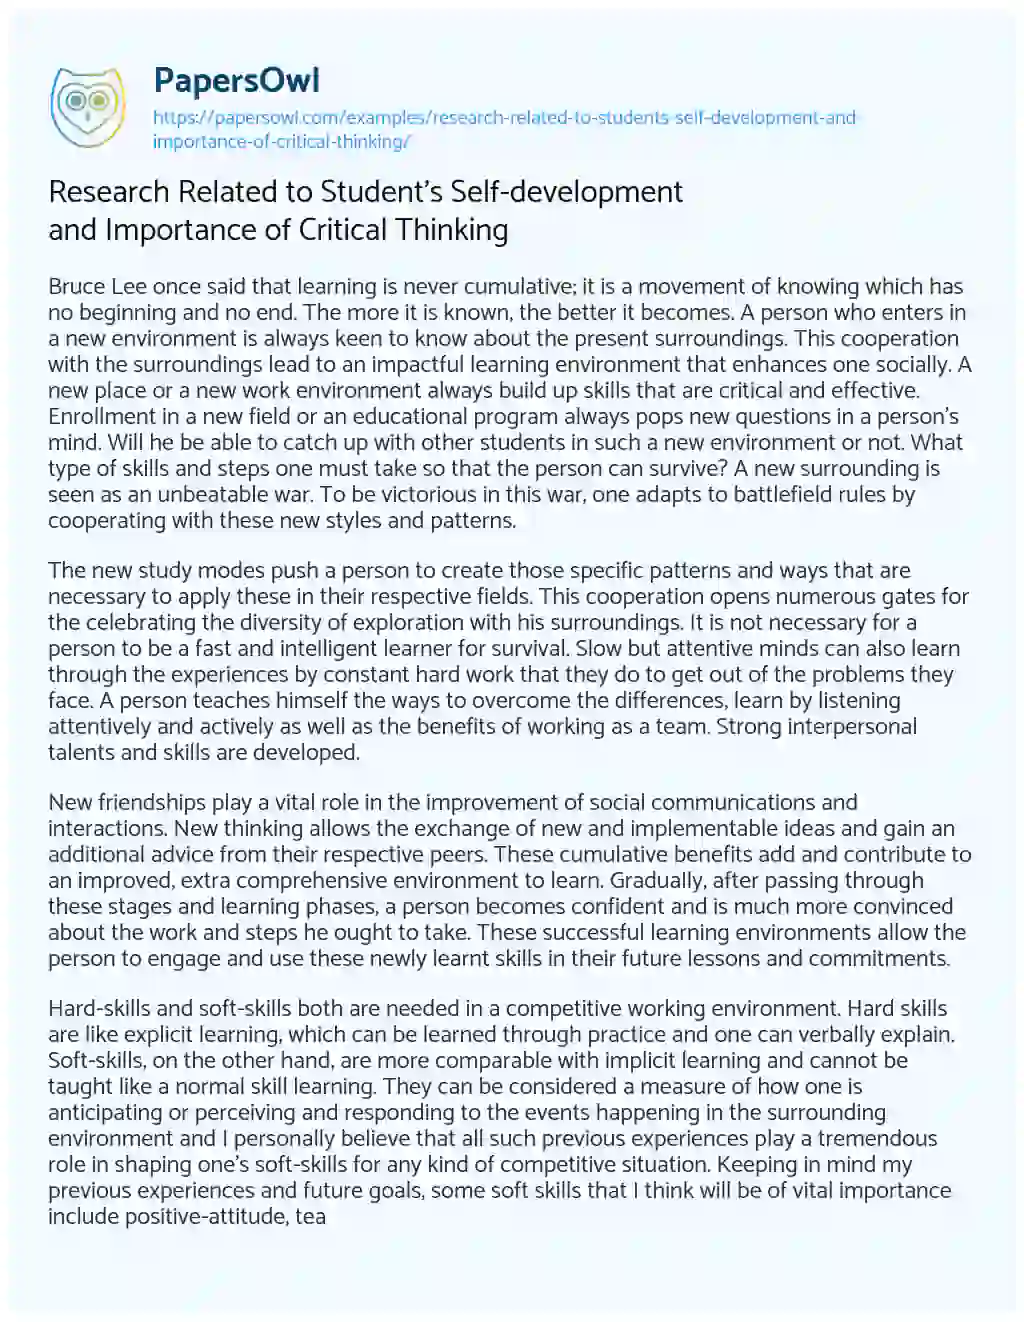 Essay on Research Related to Student’s Self-development and Importance of Critical Thinking